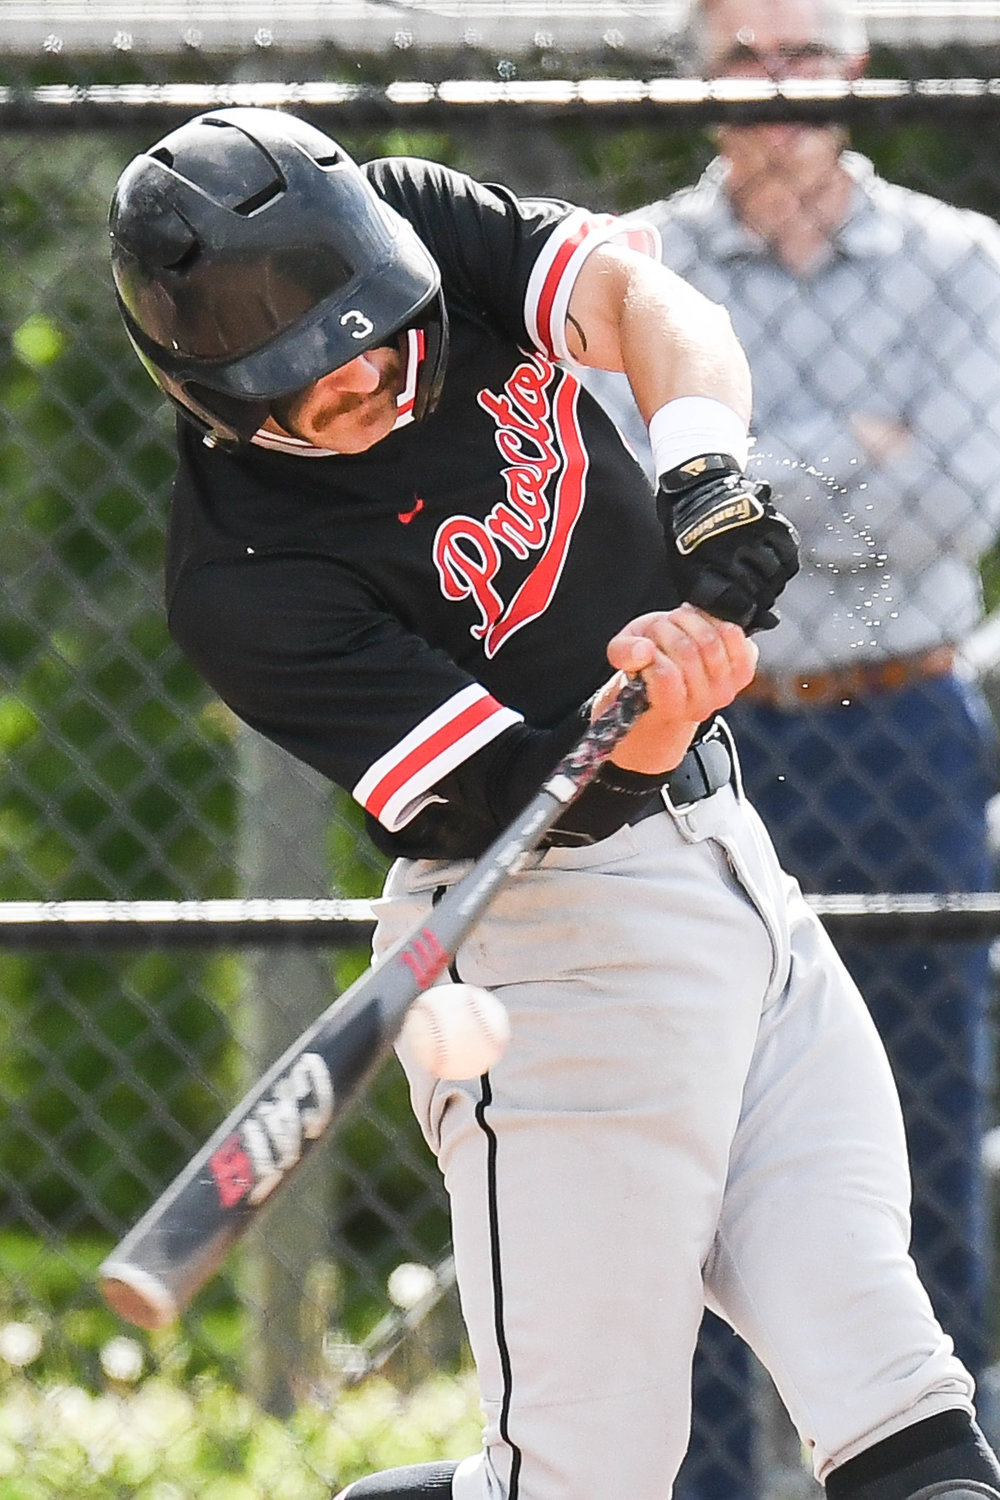 Proctor batter Todd Abraham swings at a pitch during the Section III Class A playoff game against Fayetteville-Manlius on Tuesday at Murnane Field in Utica. Abraham had two hits, a run and an RBI in the team's 5-4 loss in eight innings.